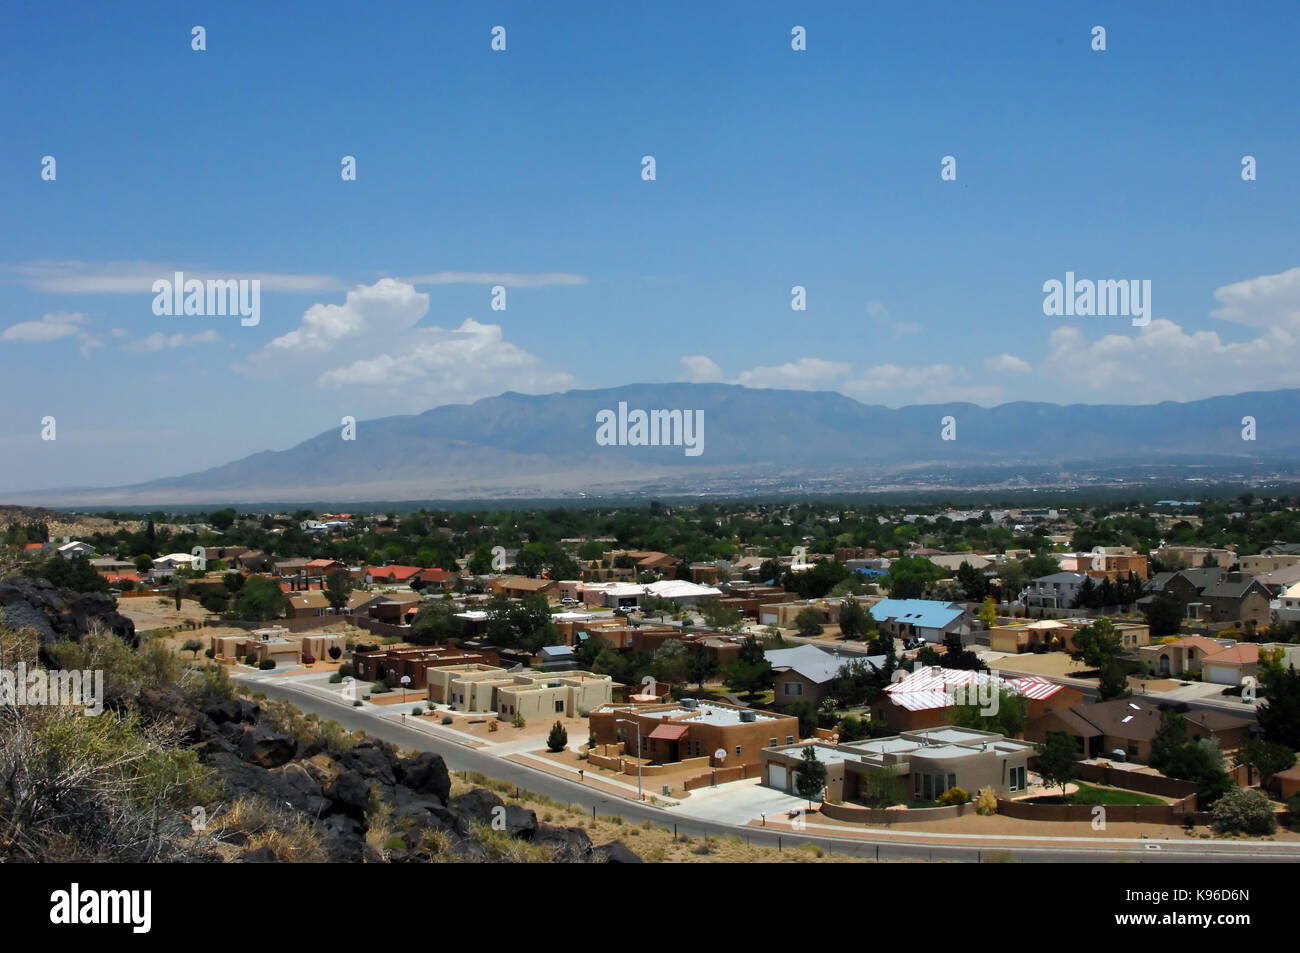 Overlook from the Petroglyph National Monument shows neighborhoods in Albuquerque and the distant Sandia Mountains. Stock Photo